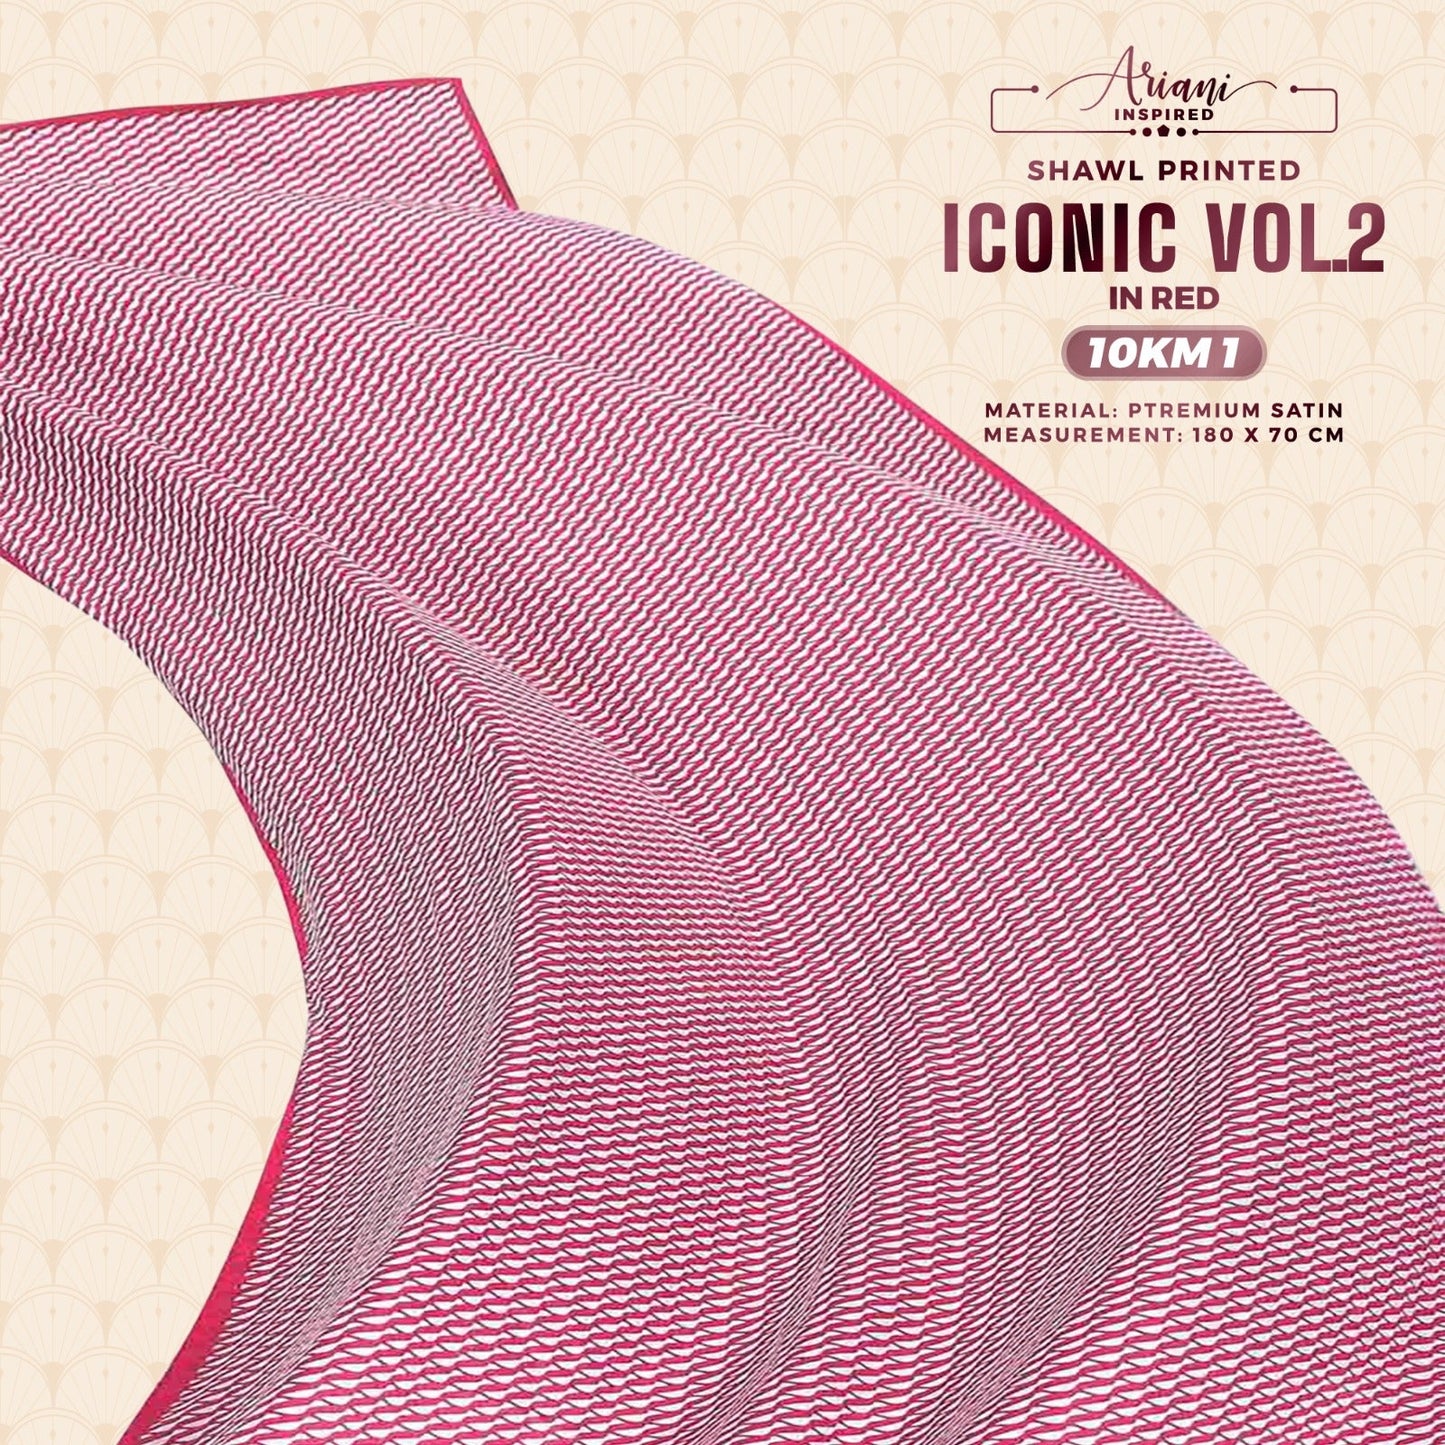 Ariani Inspired Iconic VOL.2 Printed Shawl Collection